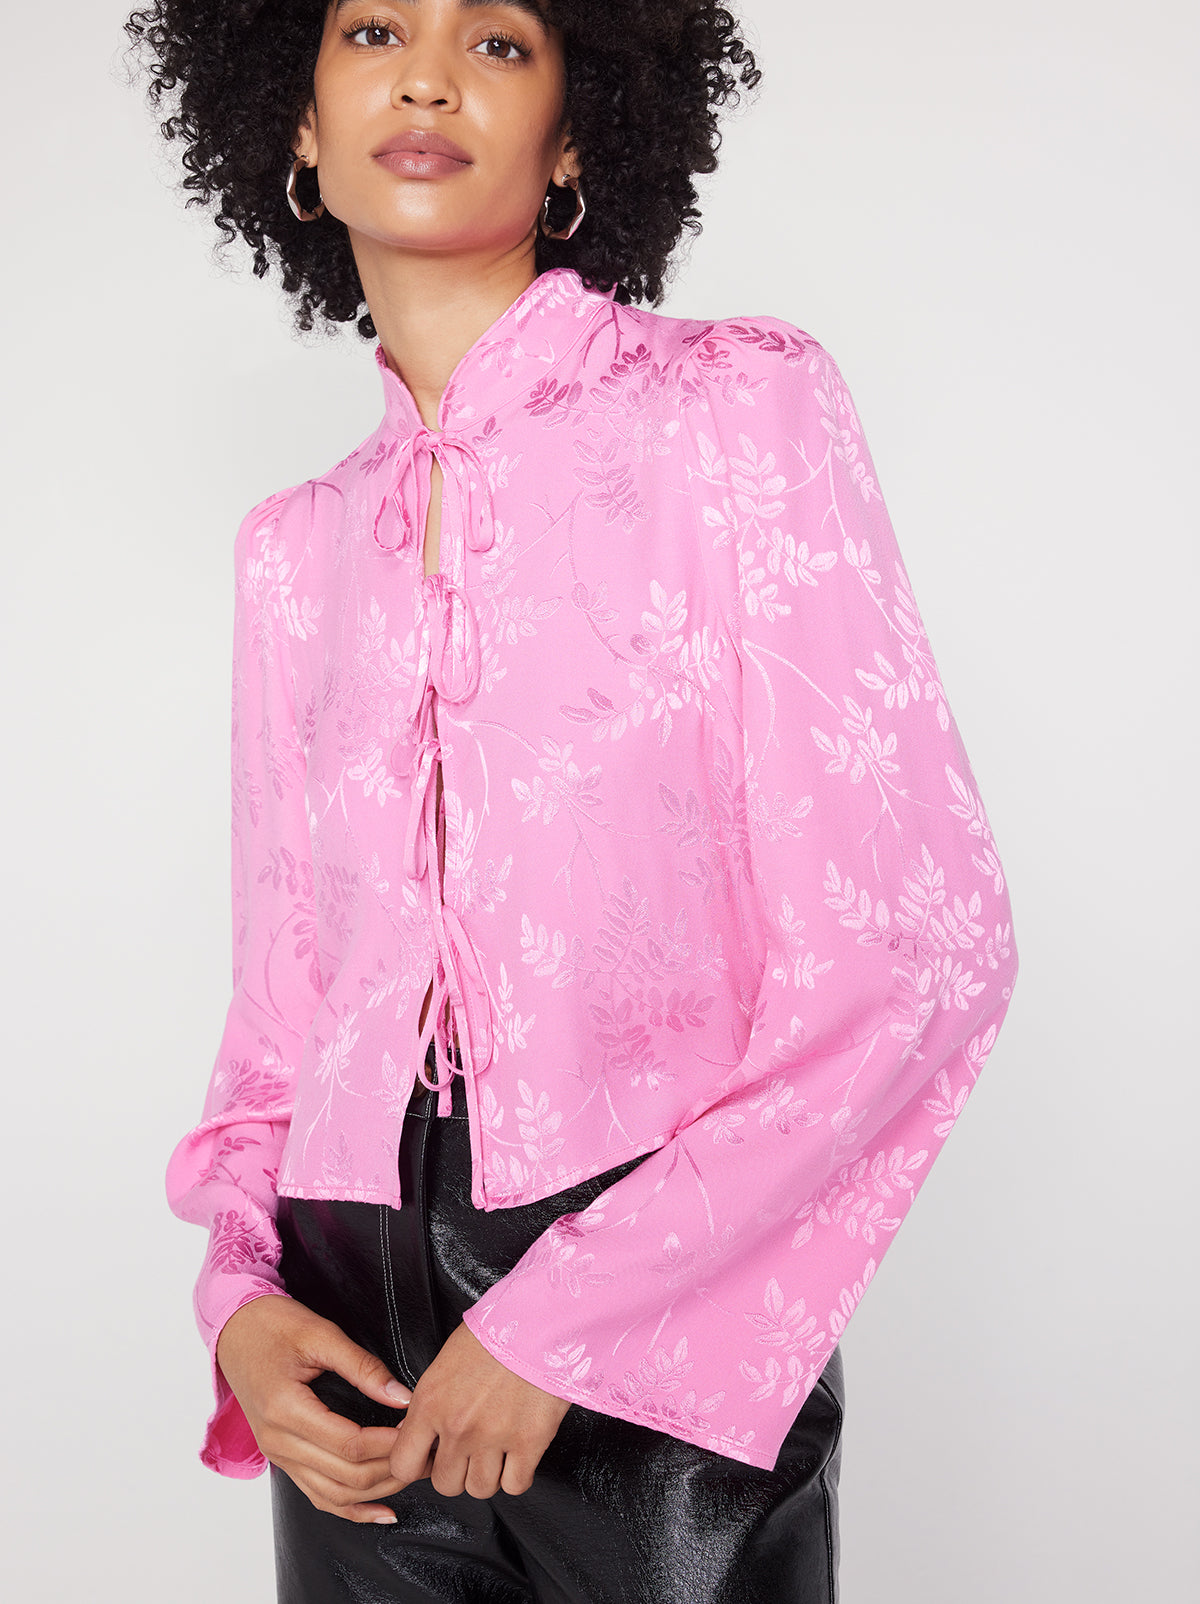 Cecily Pink Floral Jacquard Top